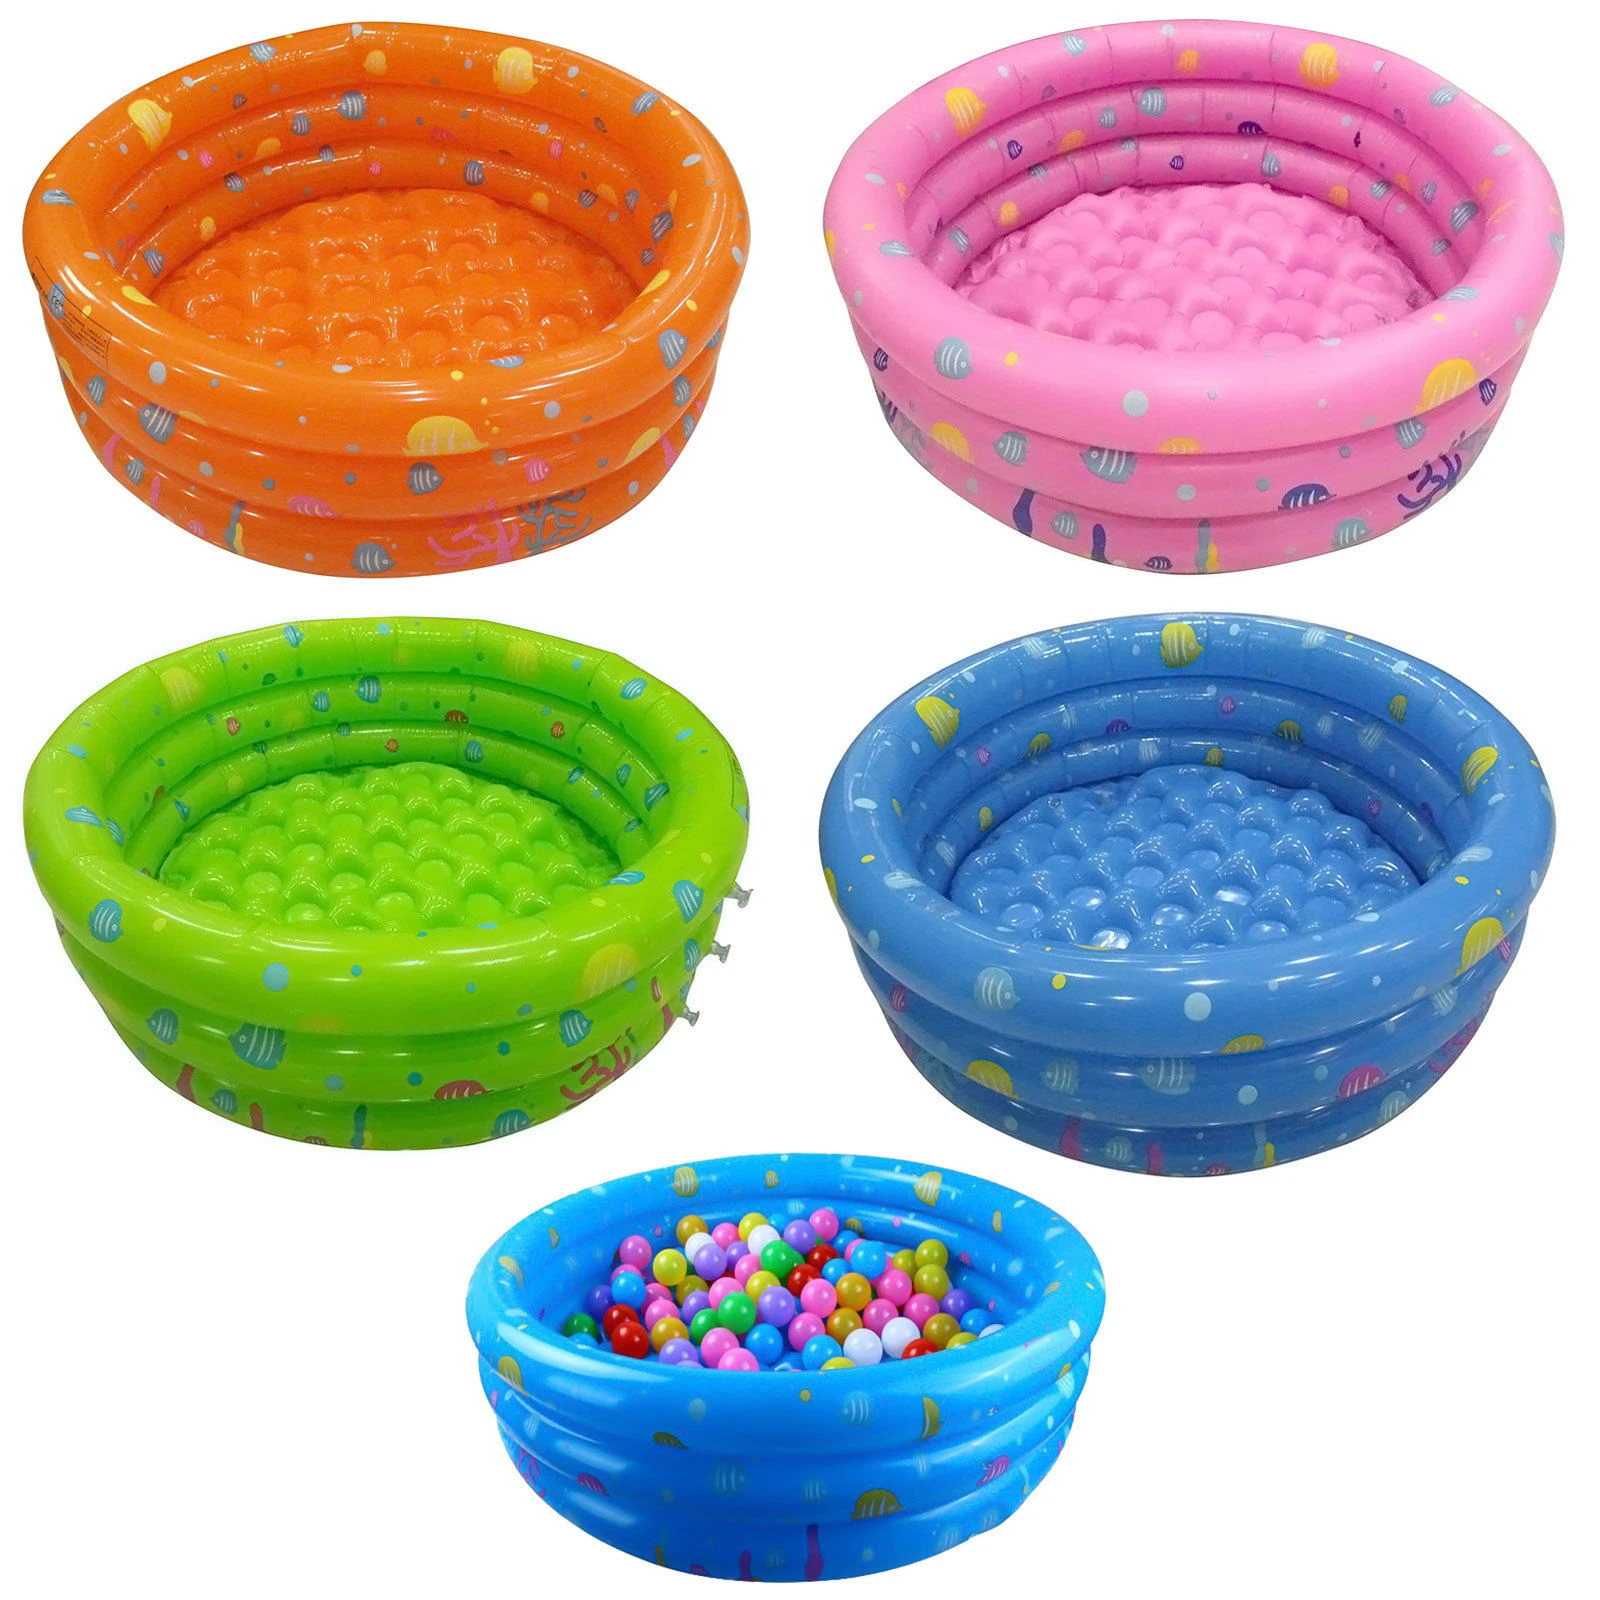 80CM 3 Ring Inflatable Round Swimming Pool Toddler Children Kids Outdoor Play Balls